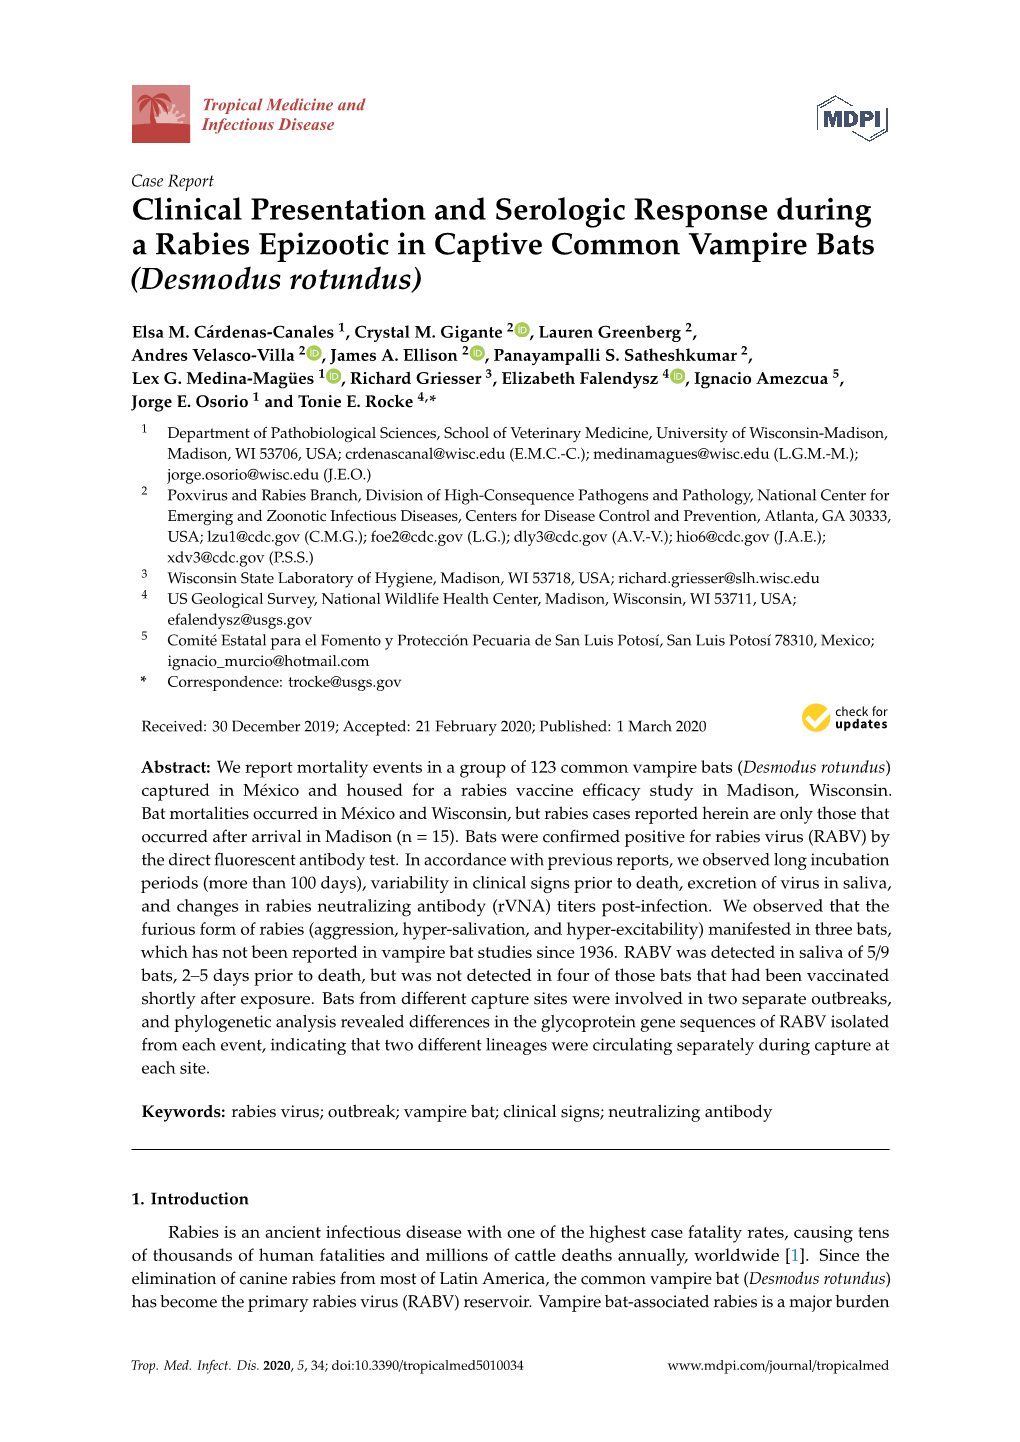 Clinical Presentation and Serologic Response During a Rabies Epizootic in Captive Common Vampire Bats (Desmodus Rotundus)